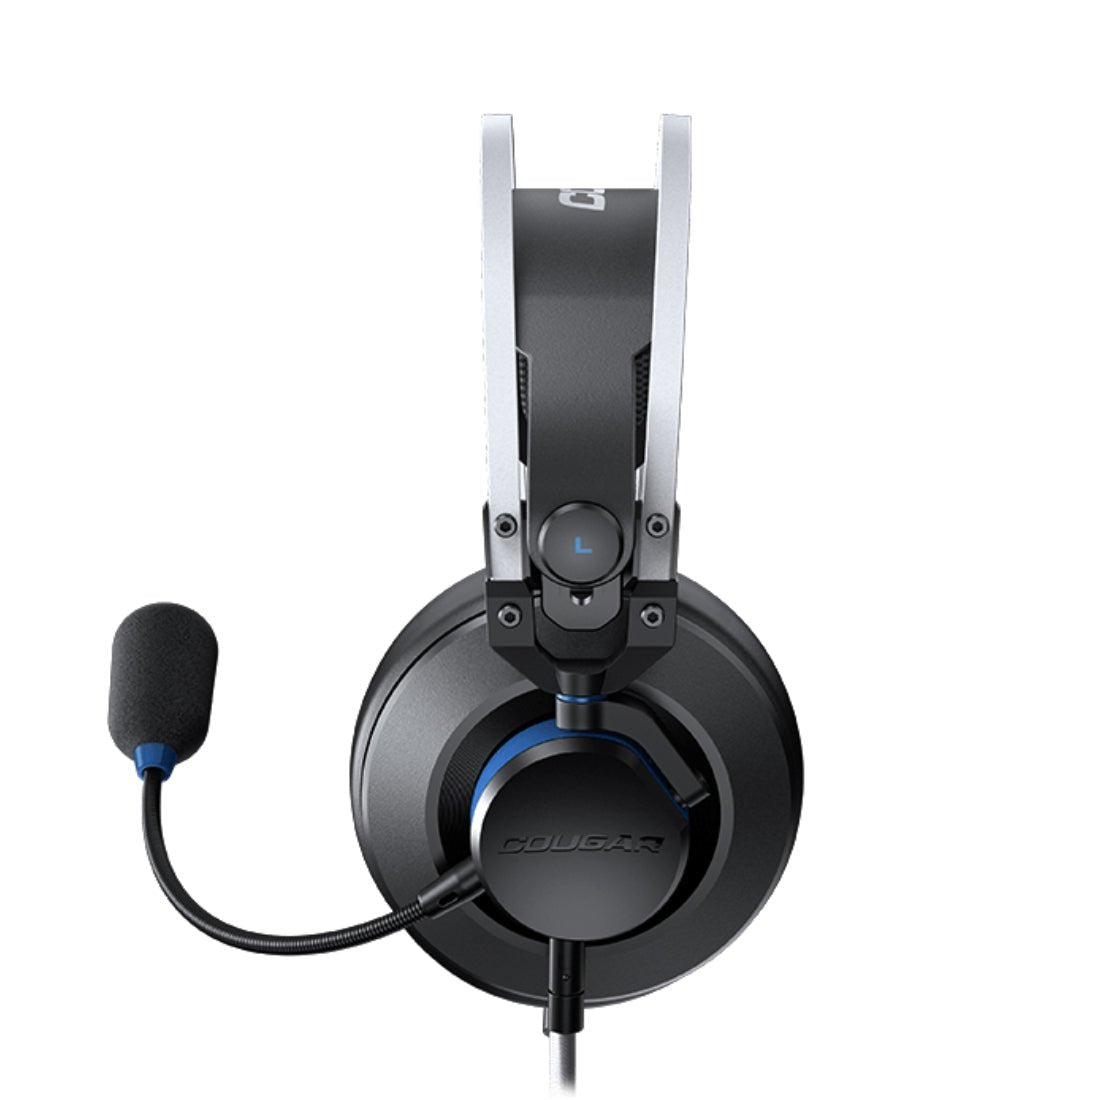 Cougar VM410 PS Gaming Headset - سماعة - Store 974 | ستور ٩٧٤